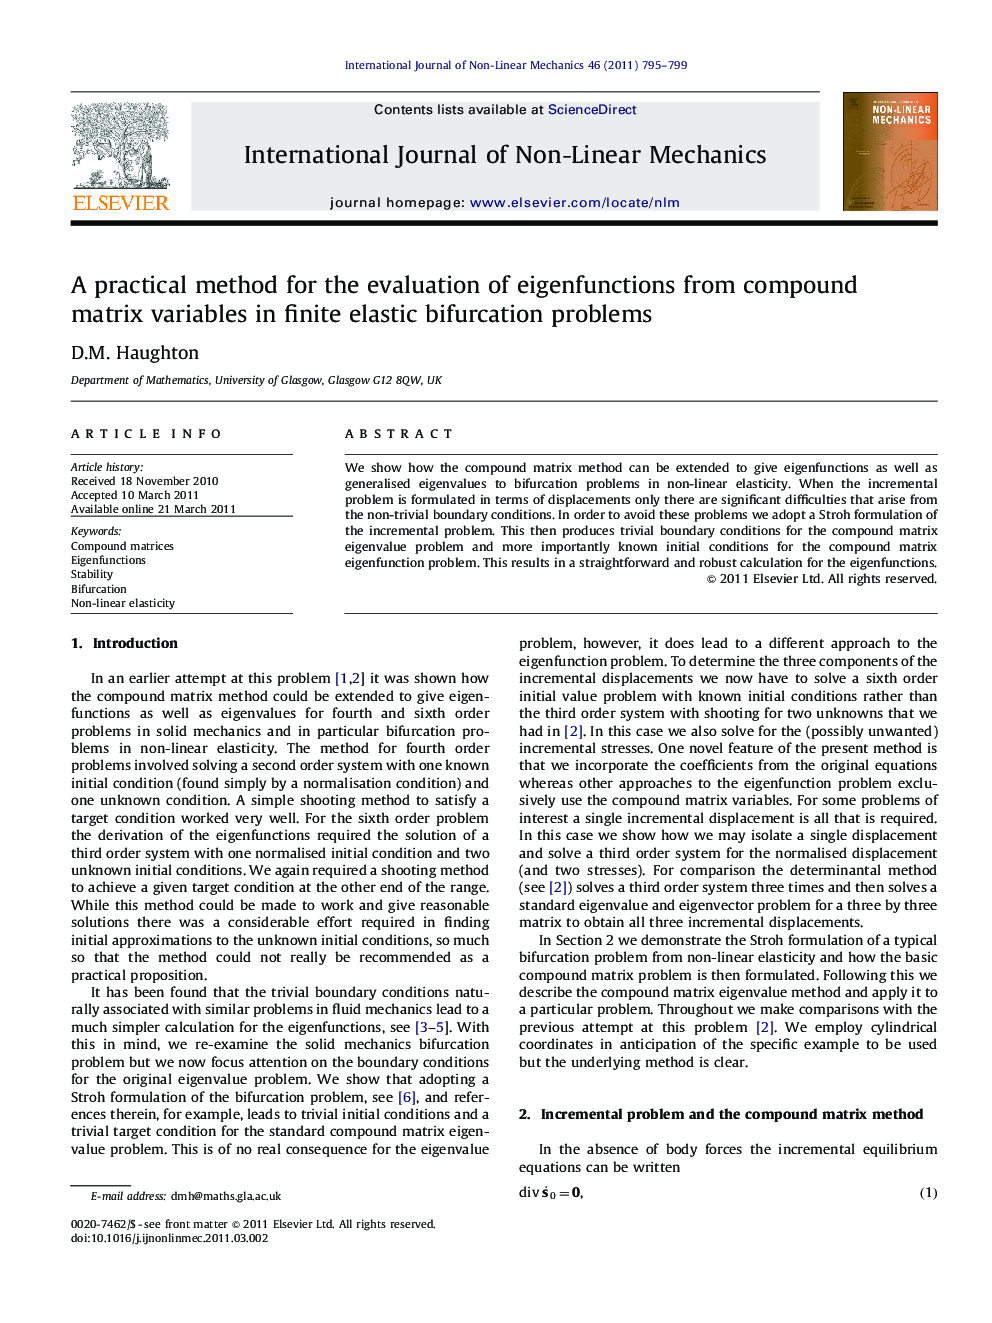 A practical method for the evaluation of eigenfunctions from compound matrix variables in finite elastic bifurcation problems